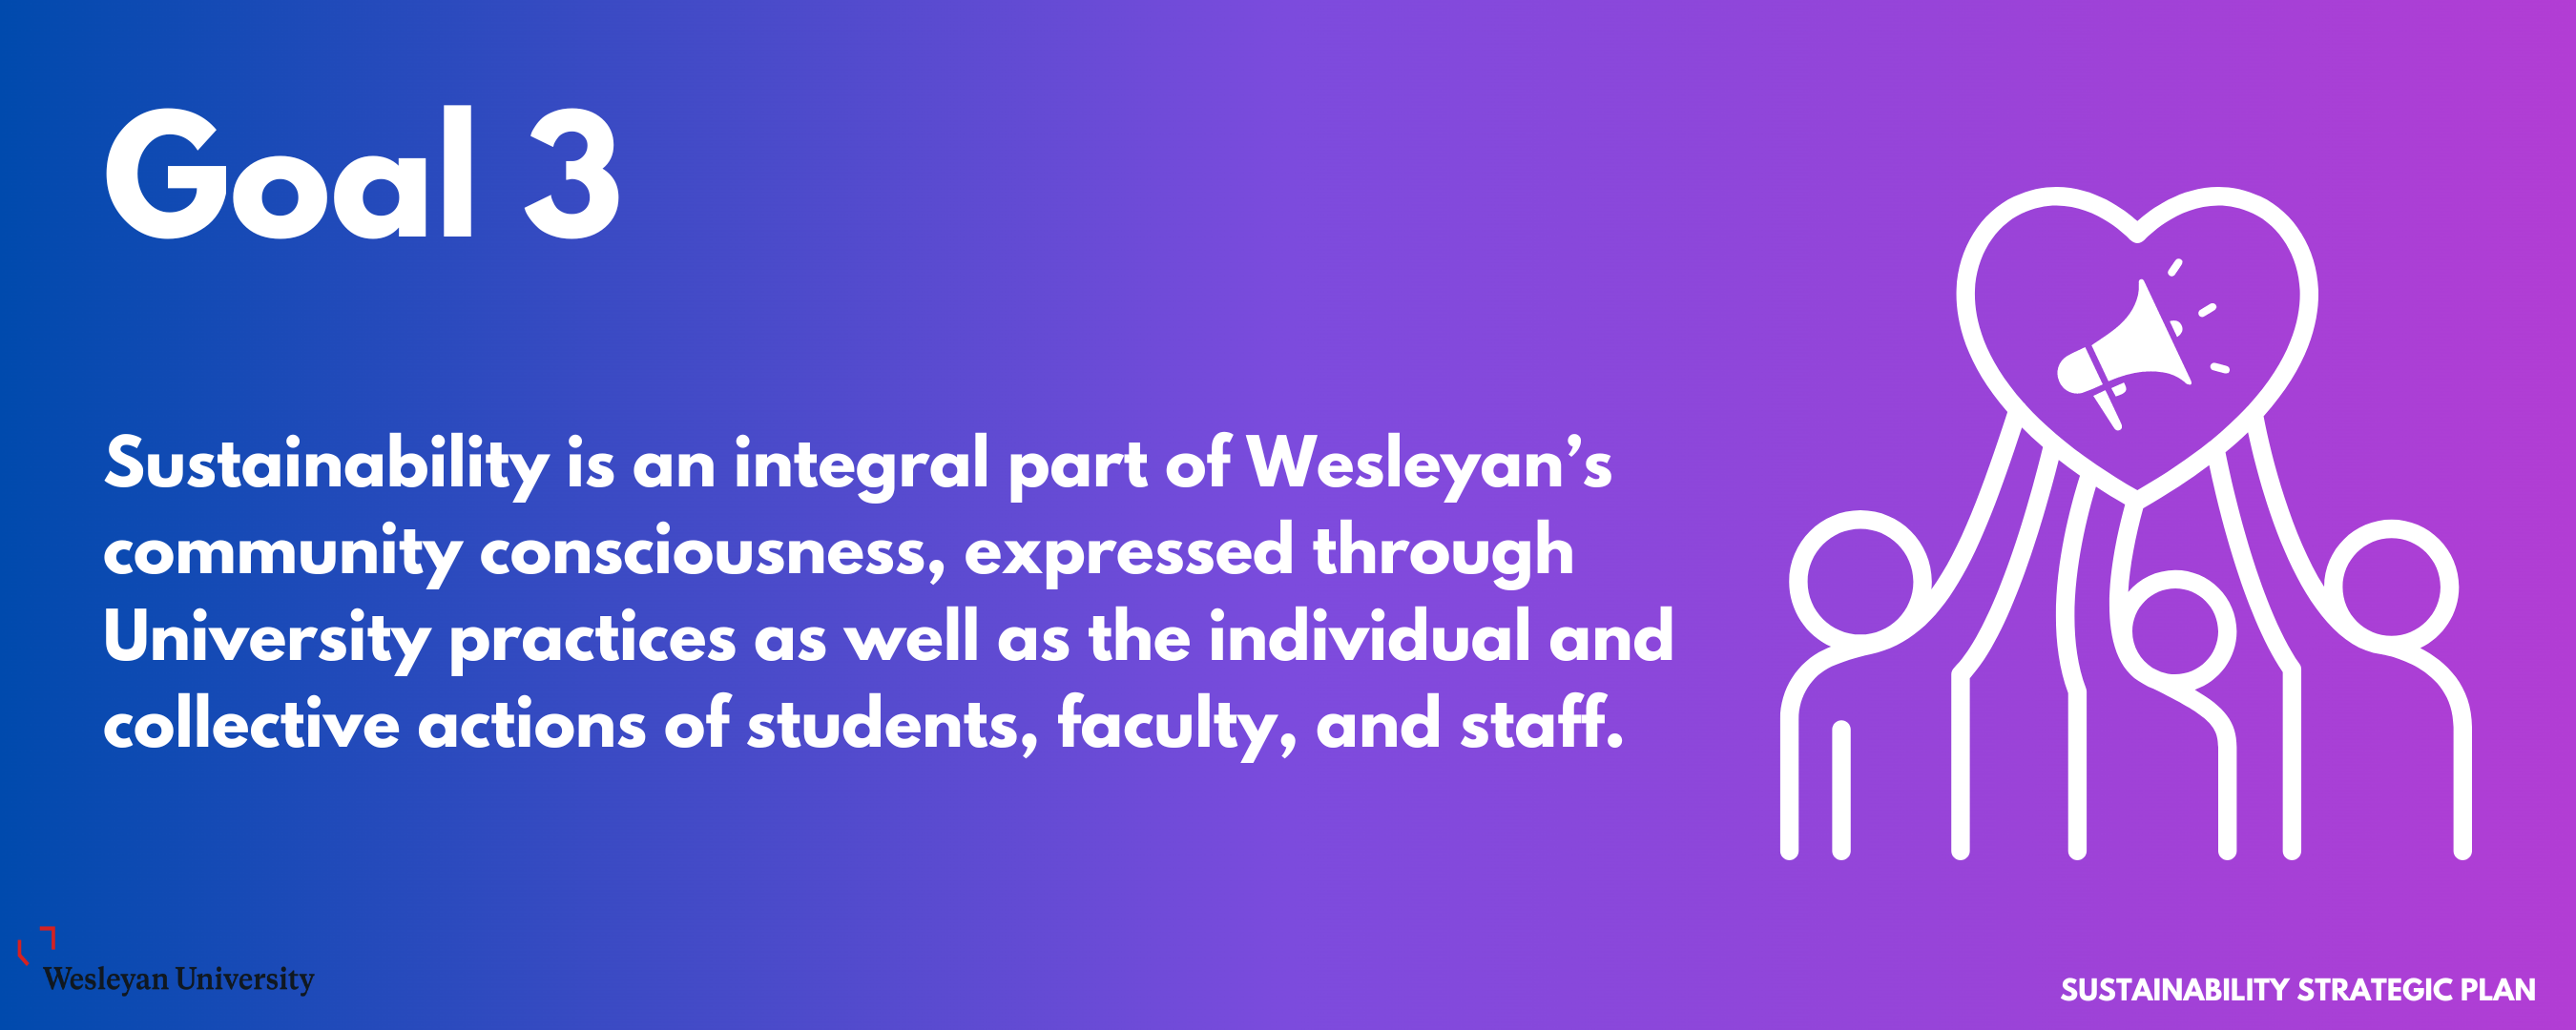 Goal 3: Sustainability is an integral part of Wesleyan’s community consciousness, expressed through University practices as well as the individual and collective actions of students, faculty, and staff.